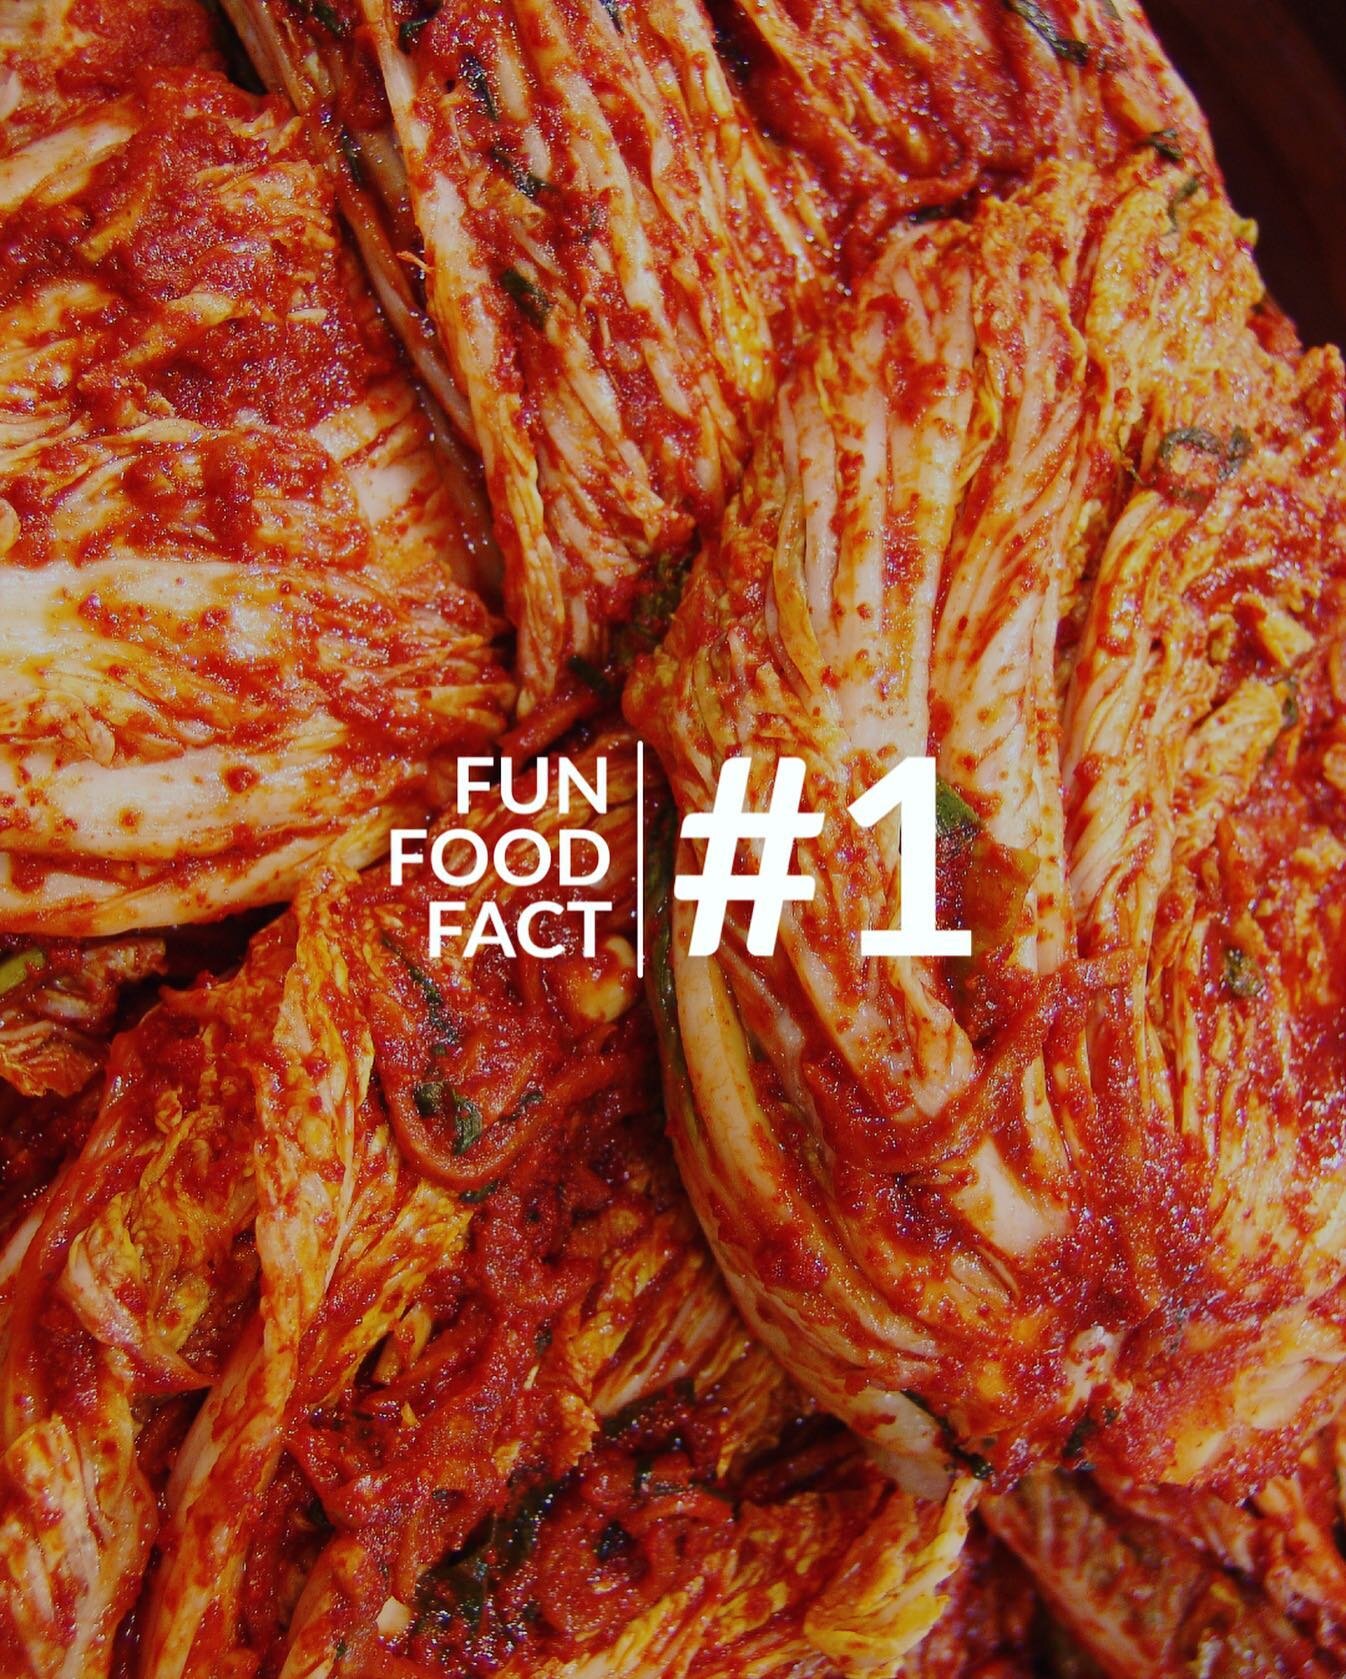 🔴Korean Kimchi offers several health benefits. It's a fermented food made from vegetables like cabbage and radishes, combined with various spices. Some potential benefits include improved digestion due to probiotics, enhanced immune system support, 